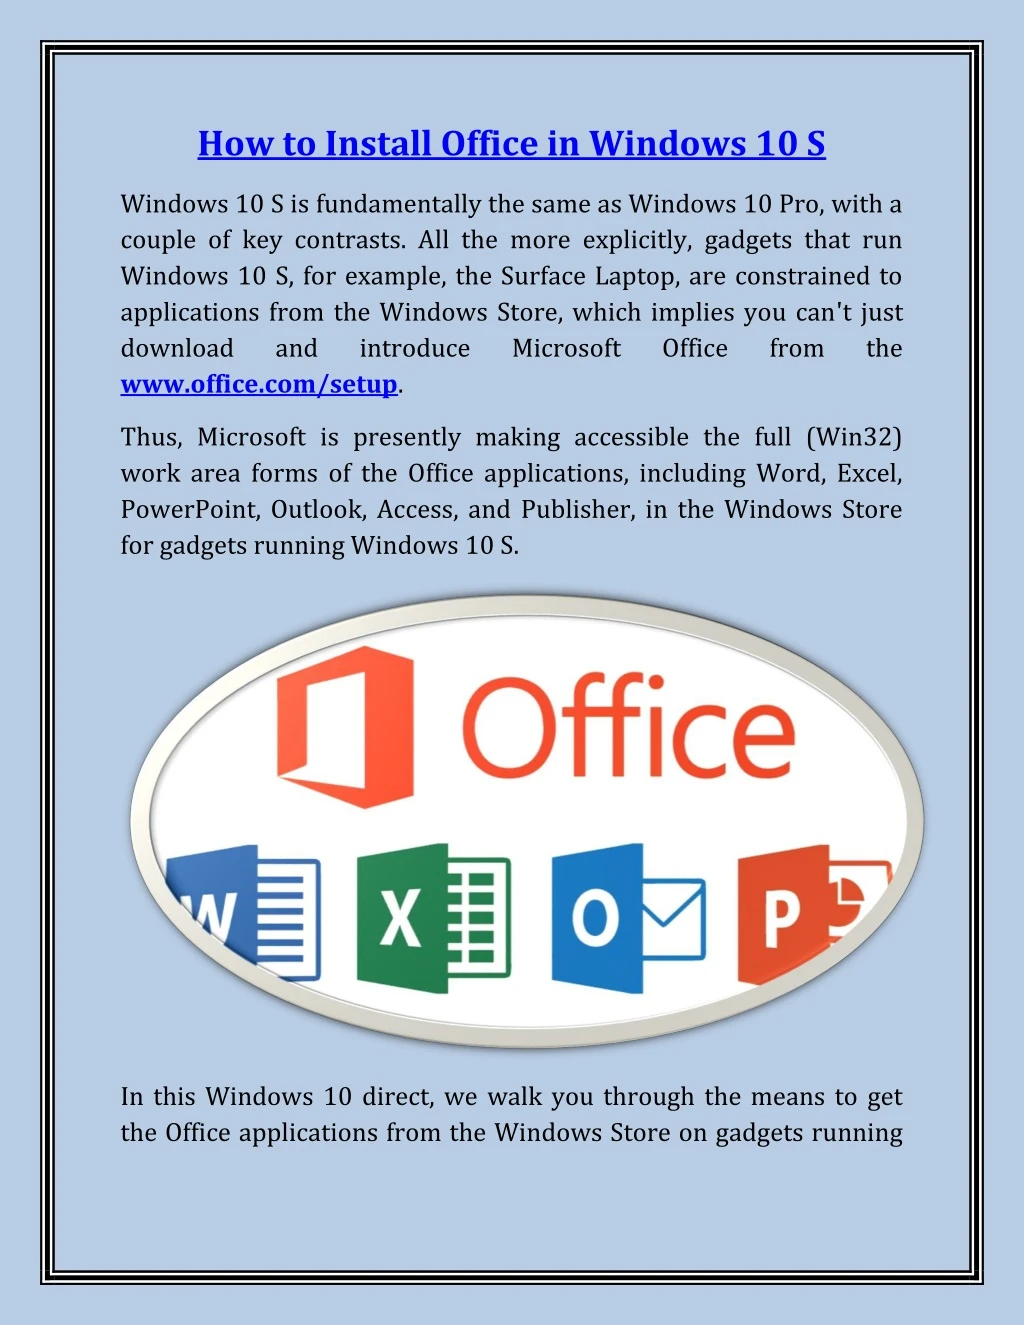 how to install office in windows 10 s